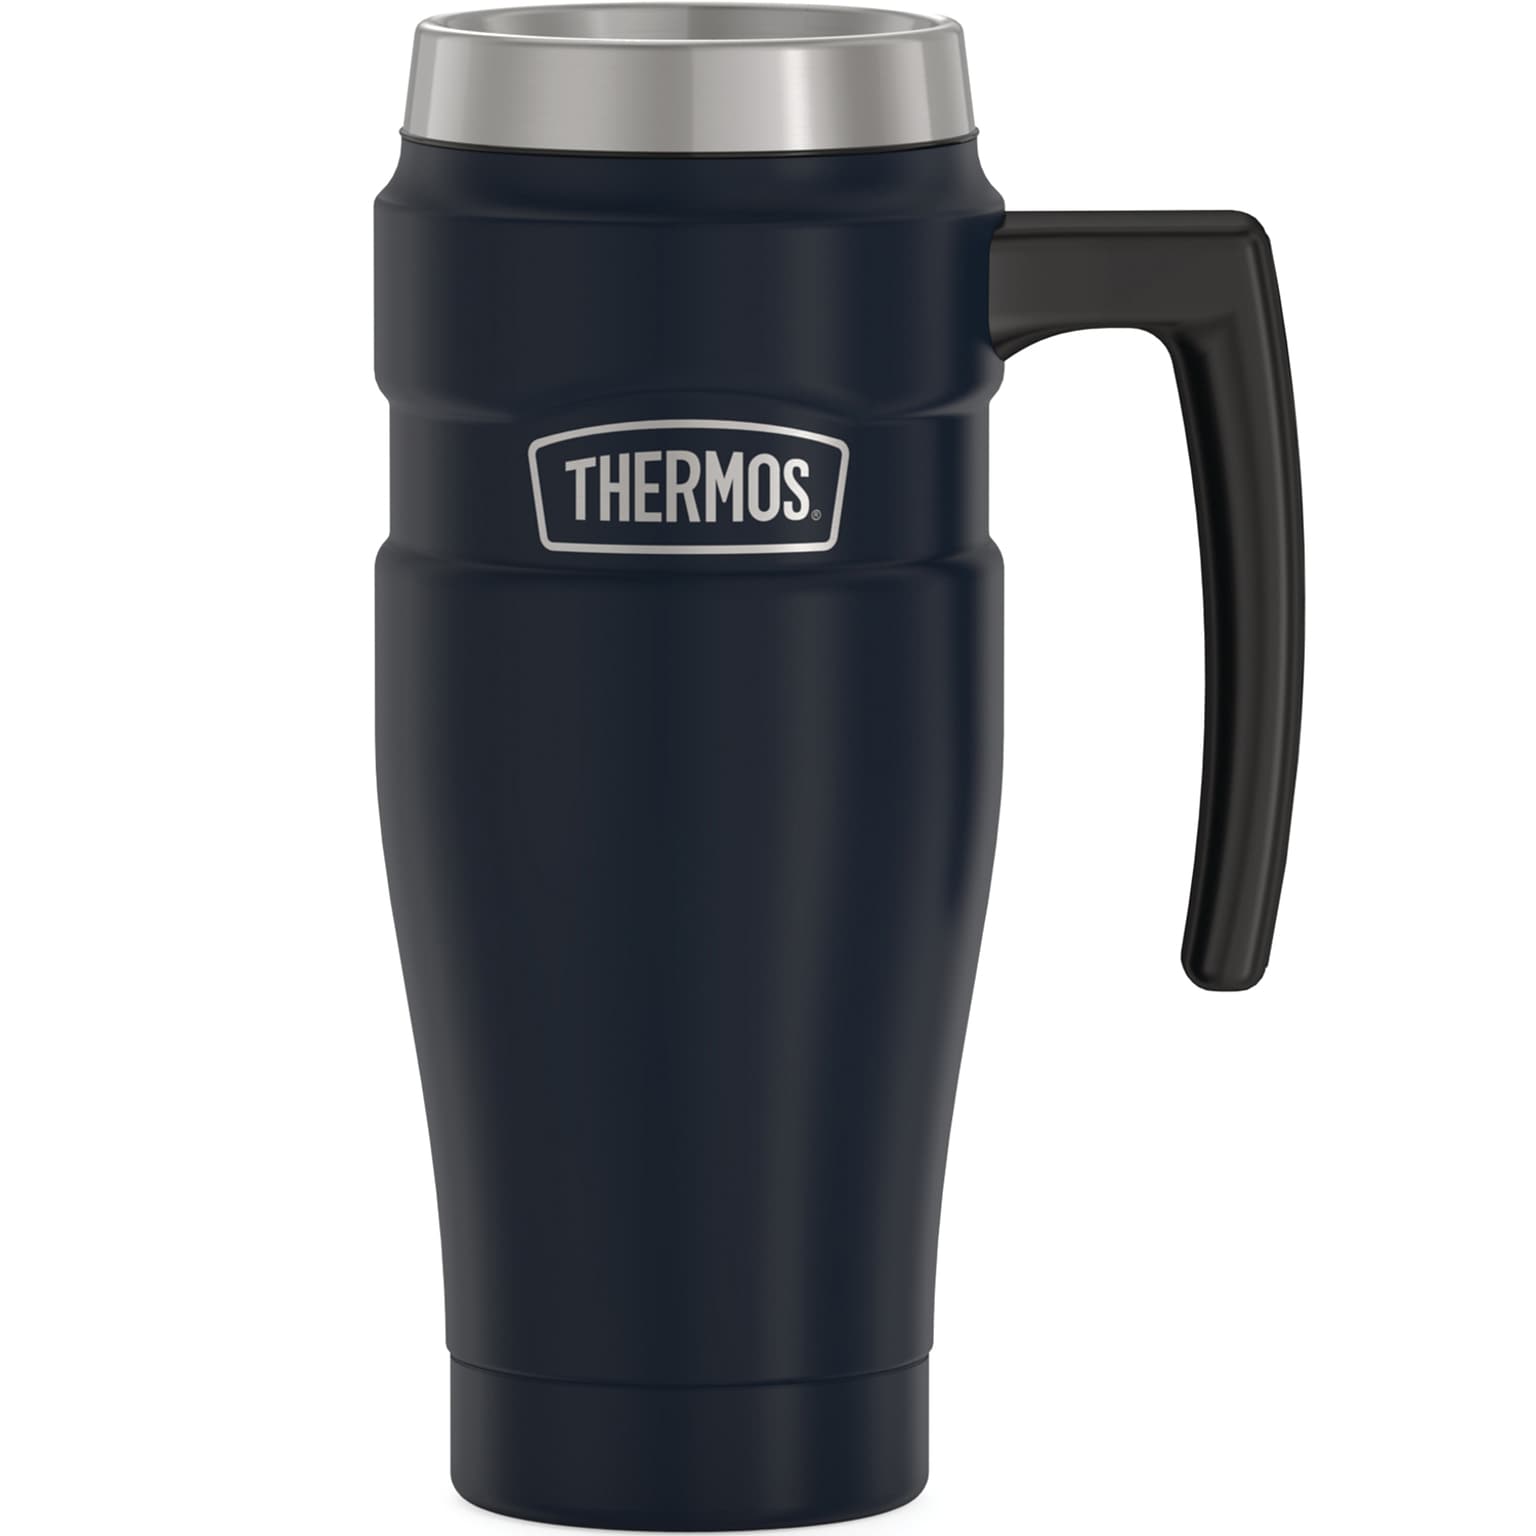 Thermos 16 oz. Stainless King Vacuum-Insulated Stainless Steel Travel Mug, Midnight Blue (THRSK1000MDB4)